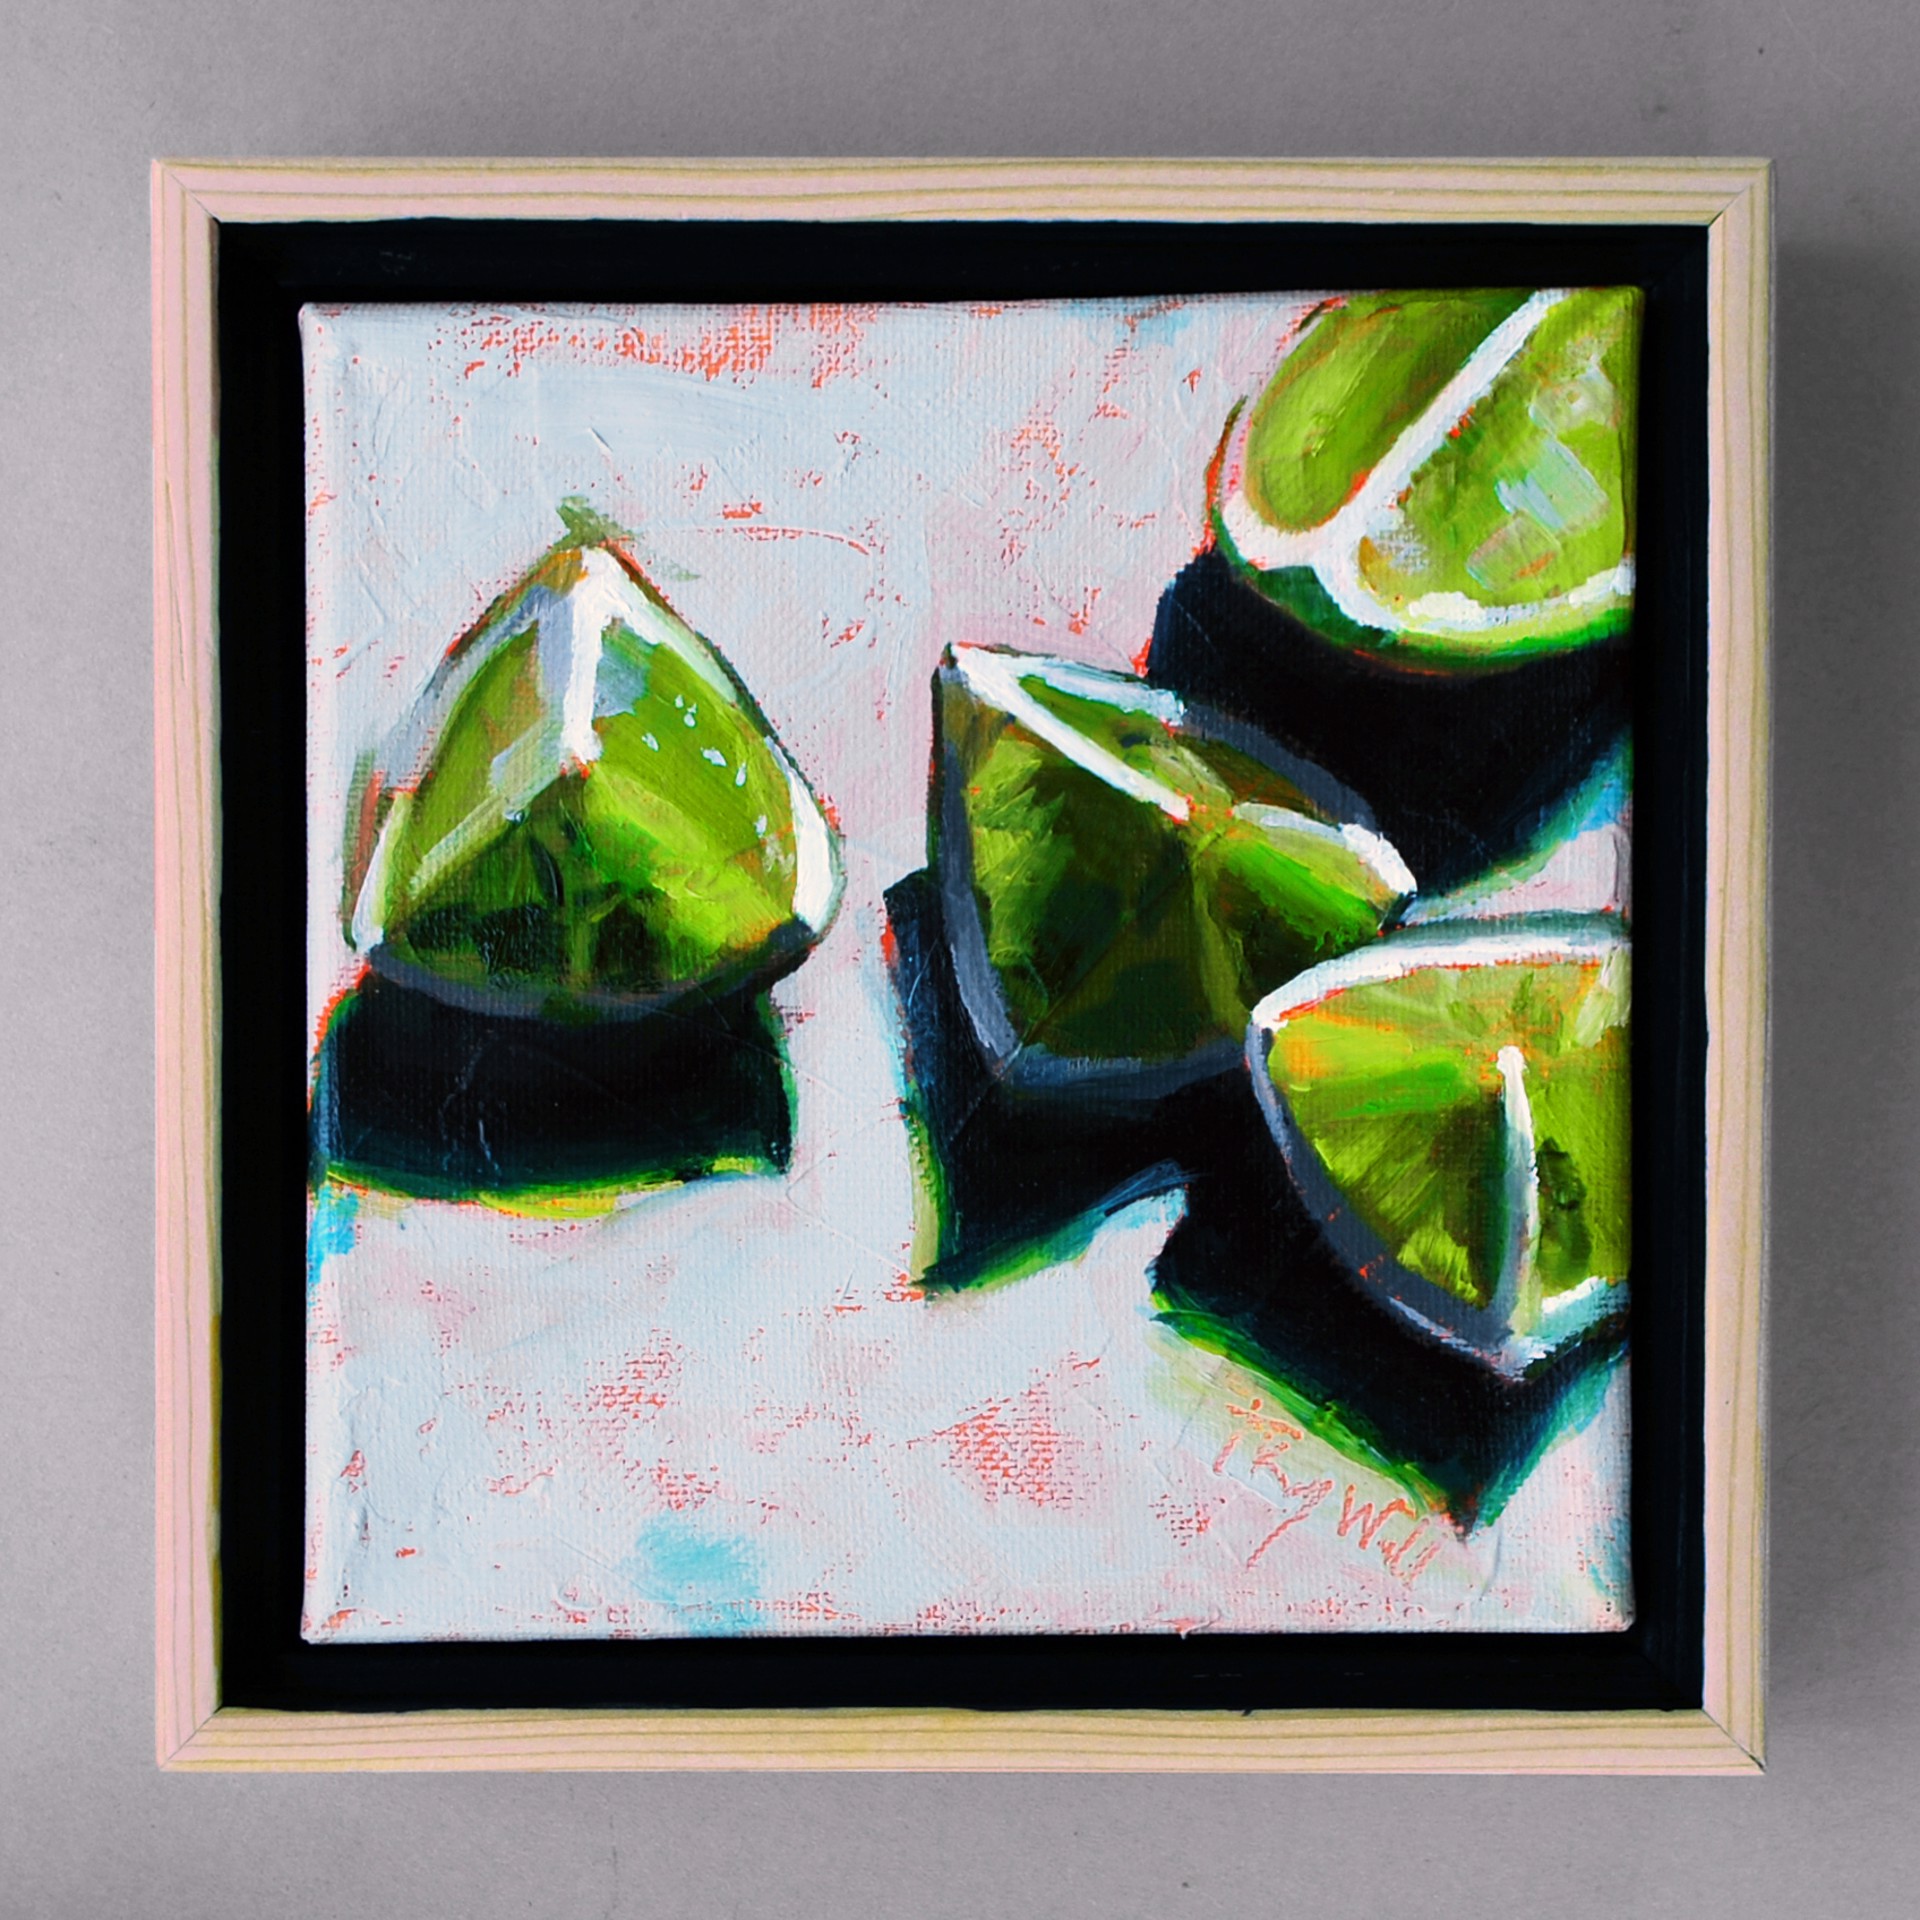 4 Limes by Tracy Wall